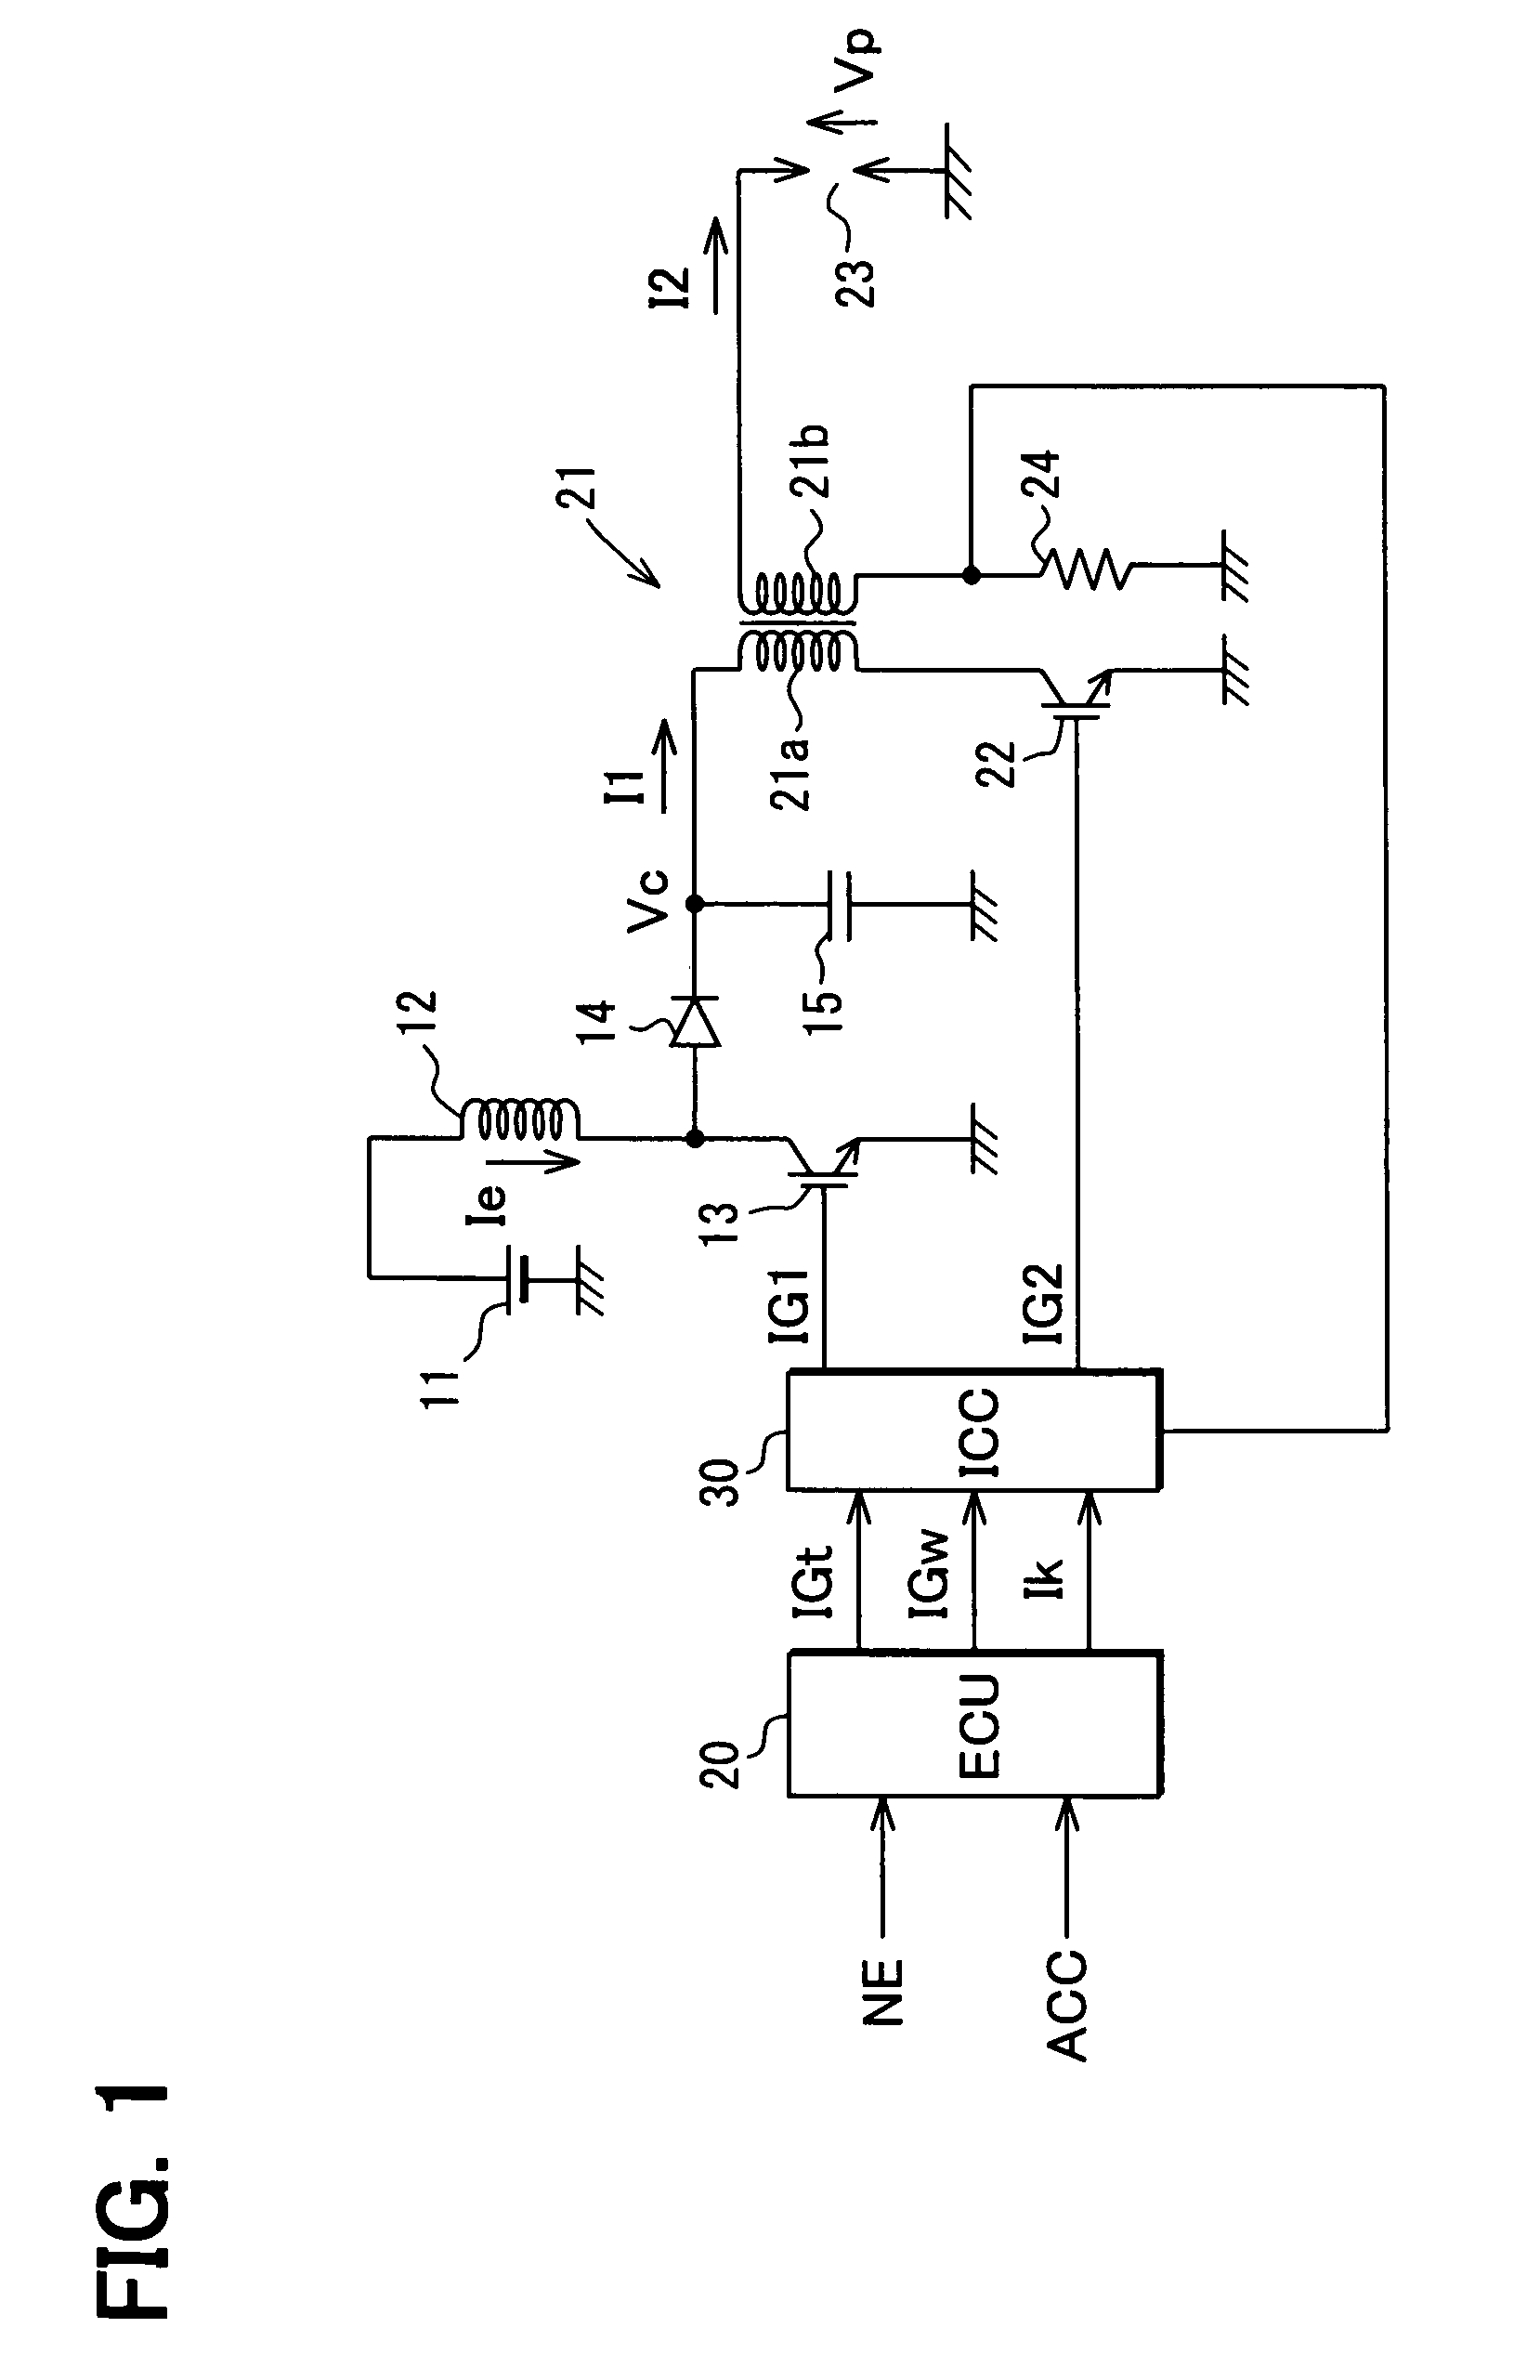 Multiple discharge ignition control apparatus and method for internal combustion engines